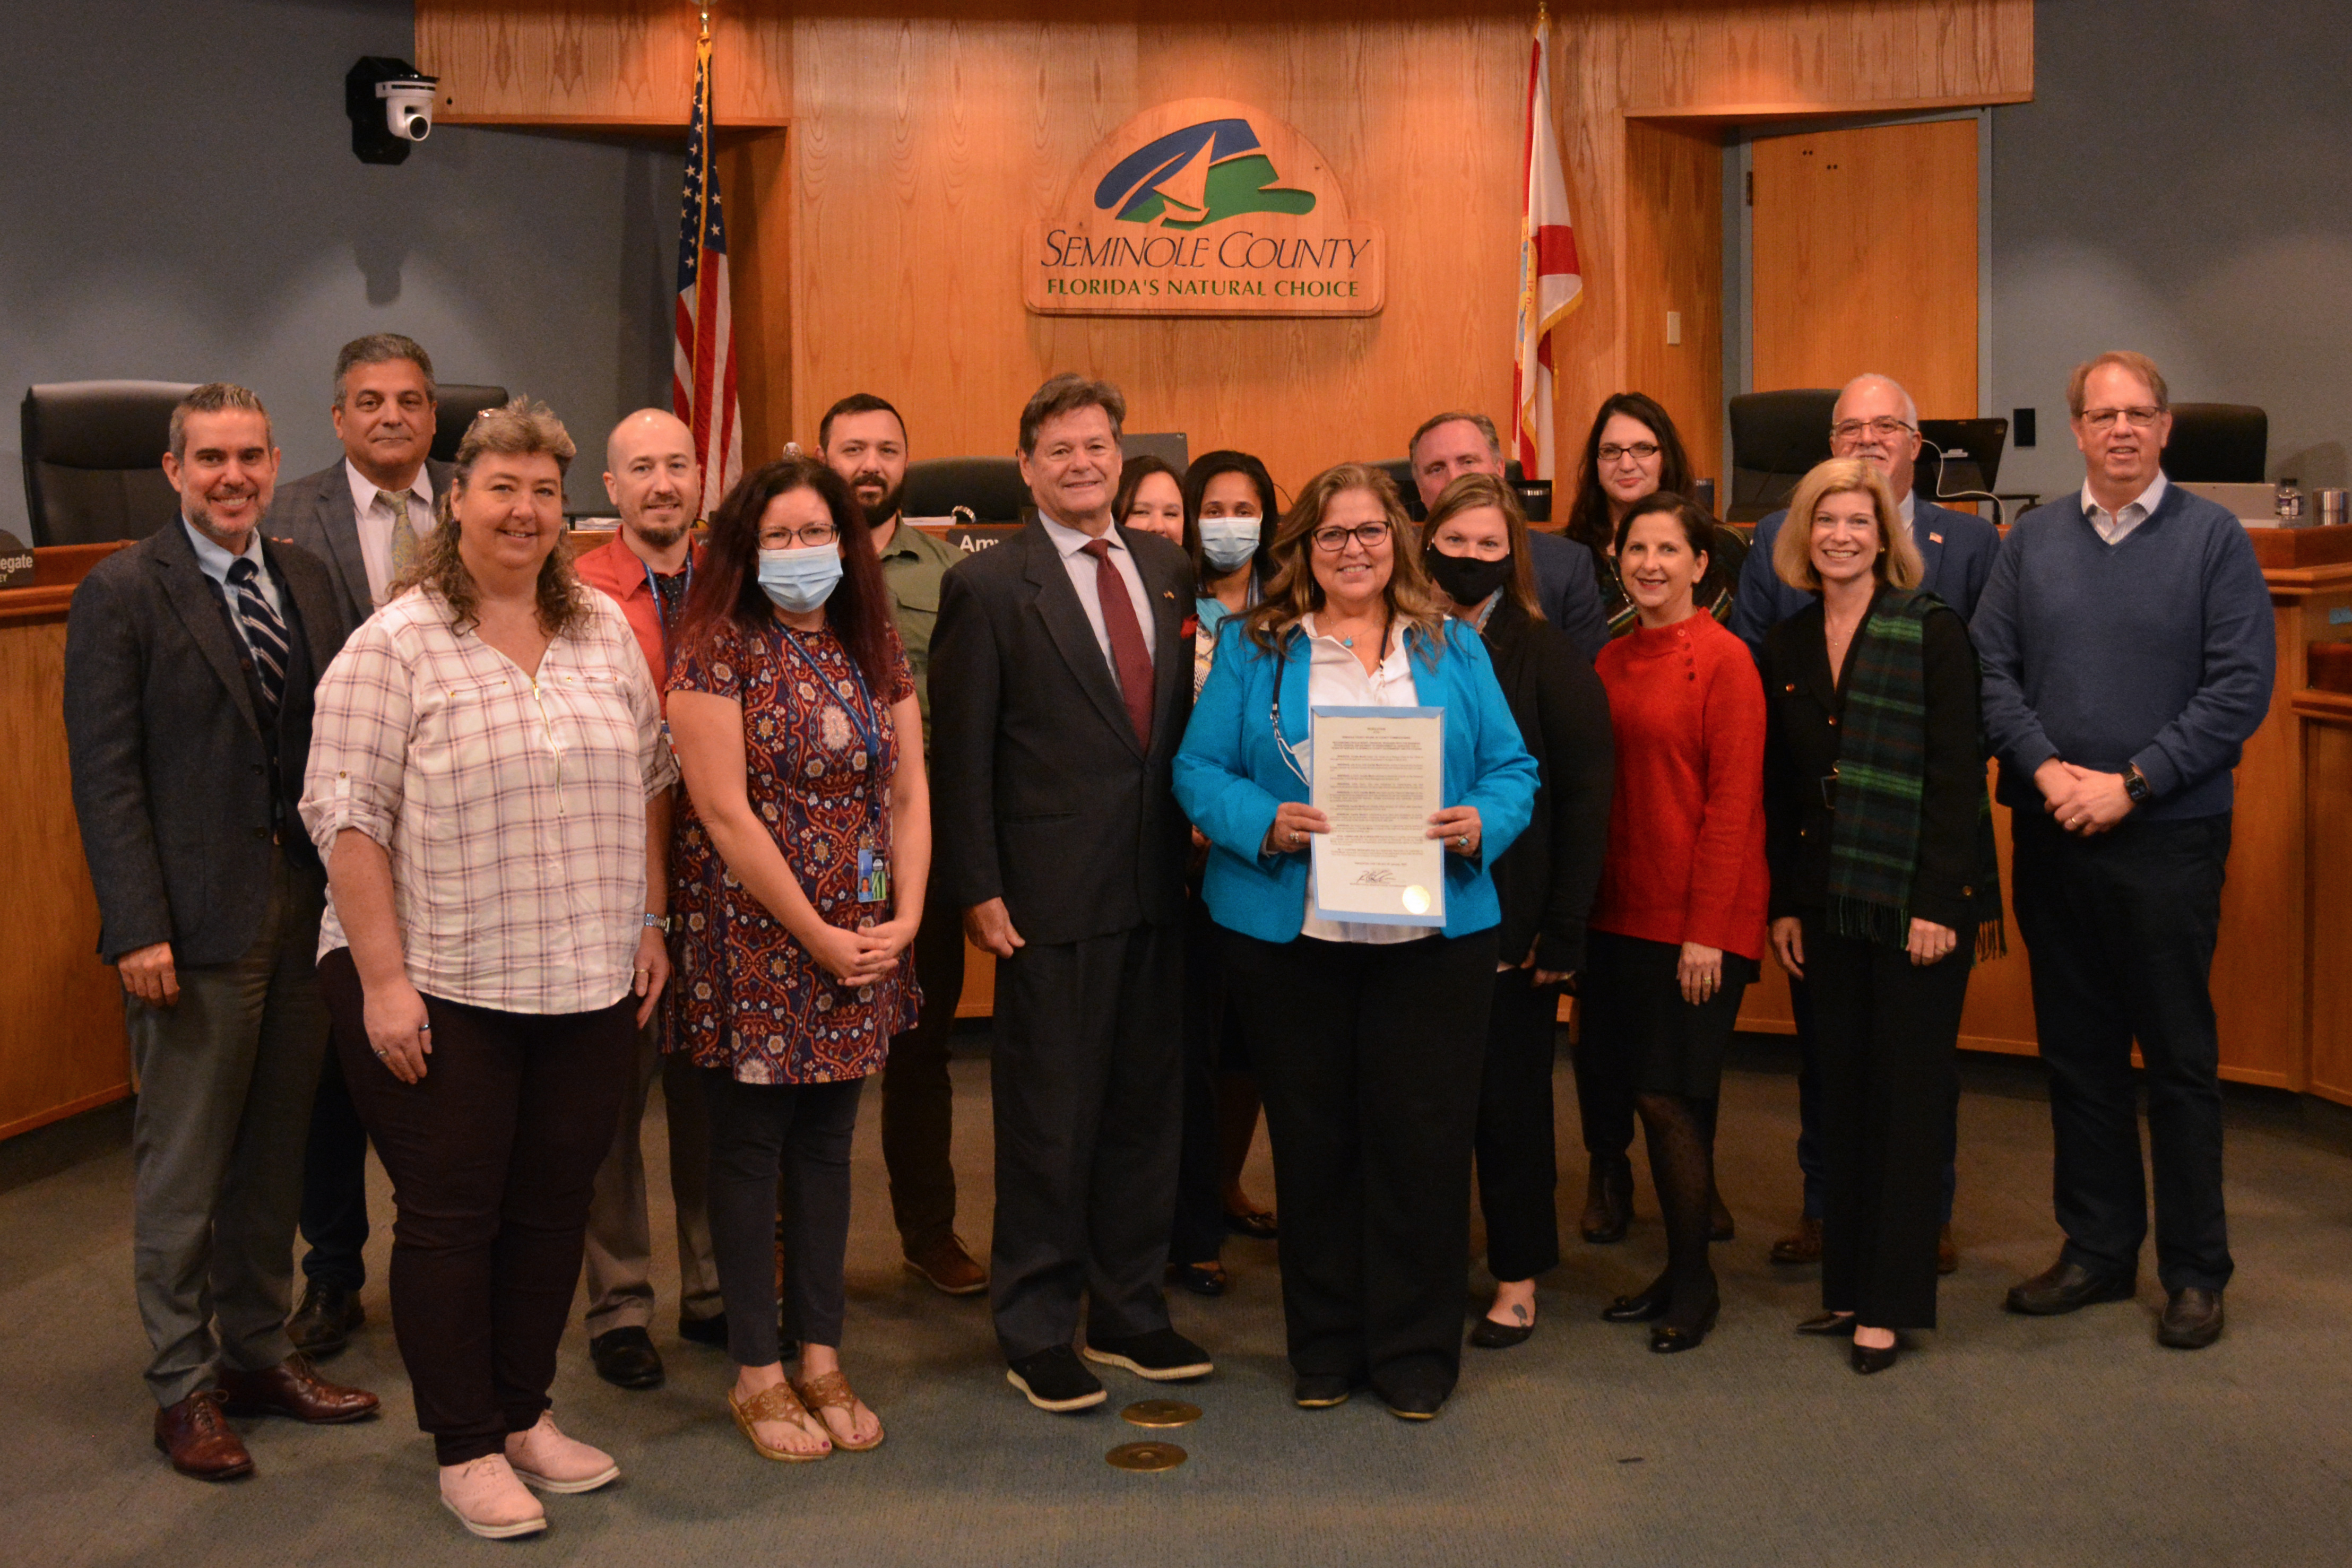 Recognizing Cecilia Monti, Financial Manager, for 17 years of service to Seminole County Government and its citizens.